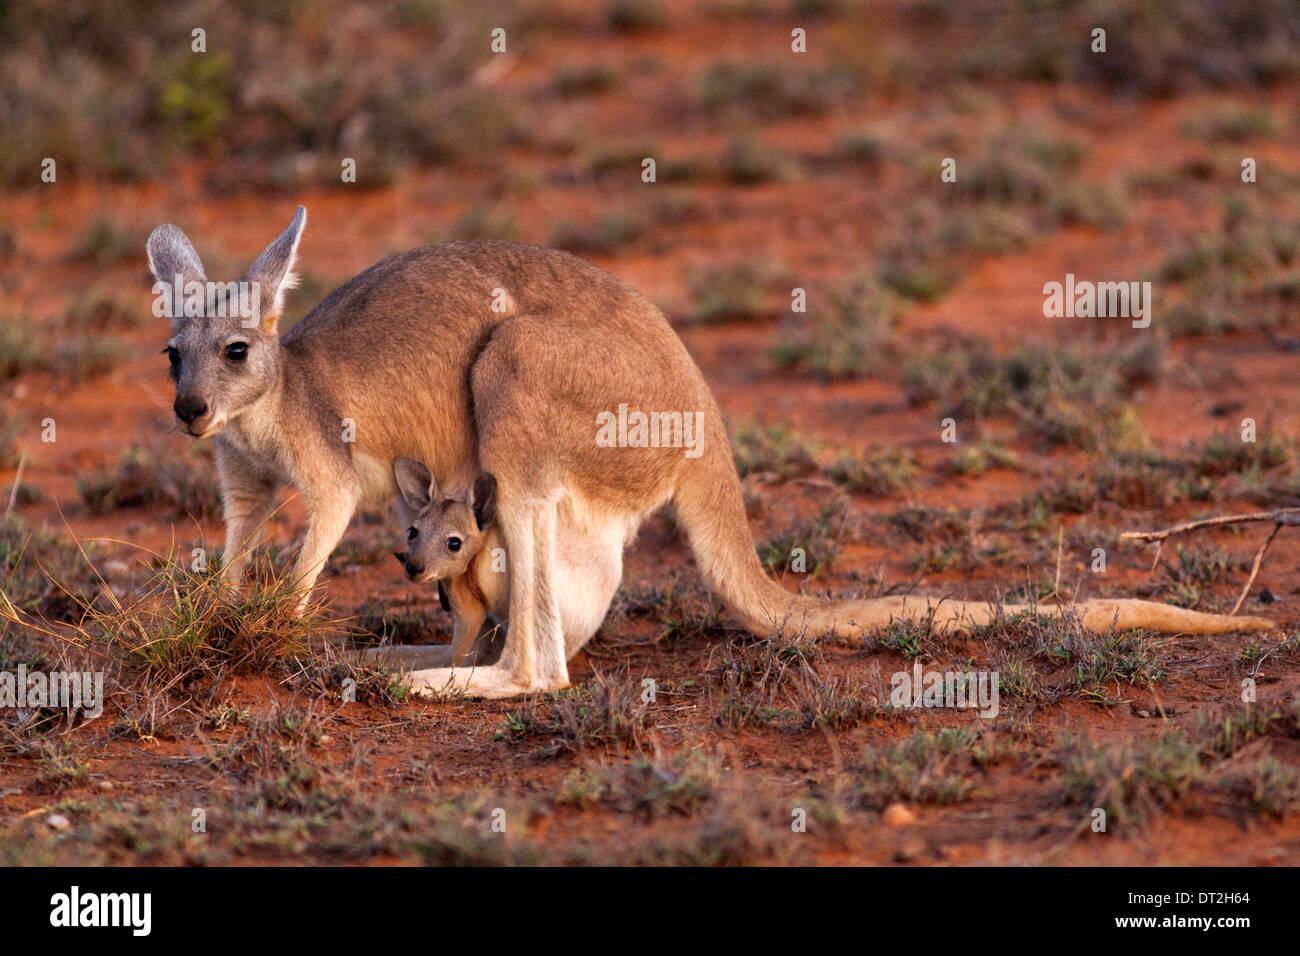 Kangaroo with Joey in Pouch, Cape Range National Park, Exmouth Western Australia Stock Photo